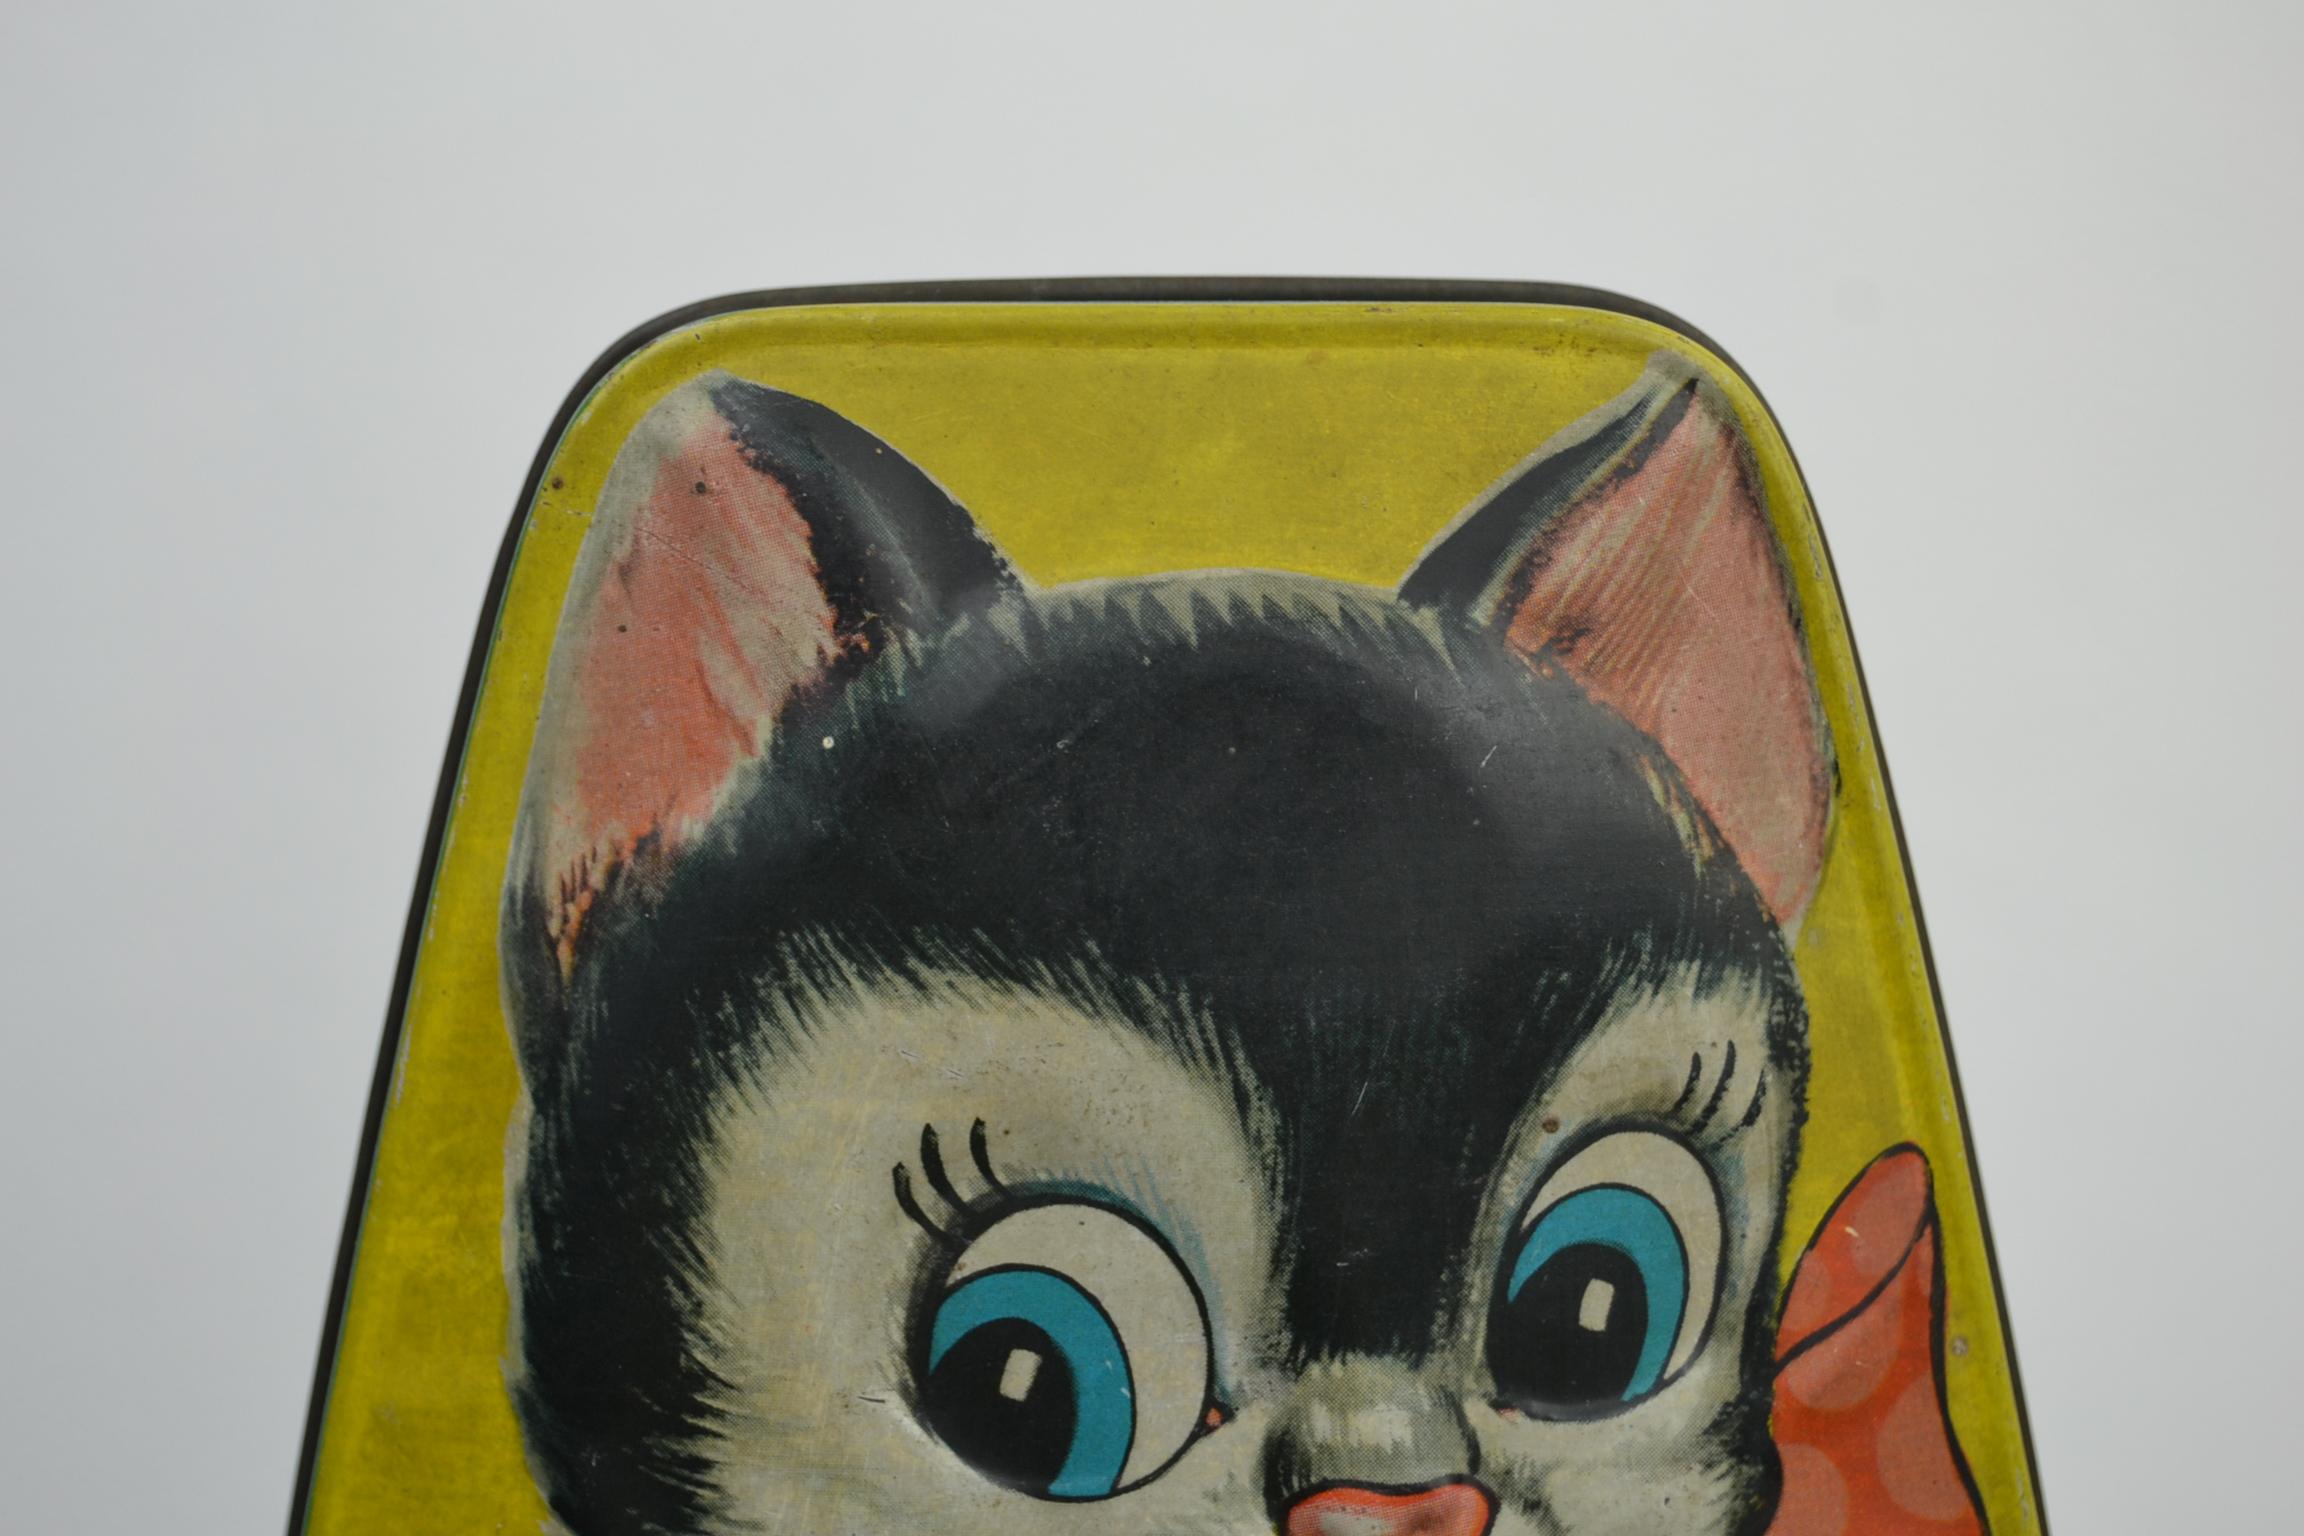 Cute vintage toffee tin box with 2 black and white cats.
The embossed tin box has a yellow background with cats on.
A mama cat with a red bow around the neck and holding a horseshoe;
the kitten holding a sign with the text: Good luck.
This